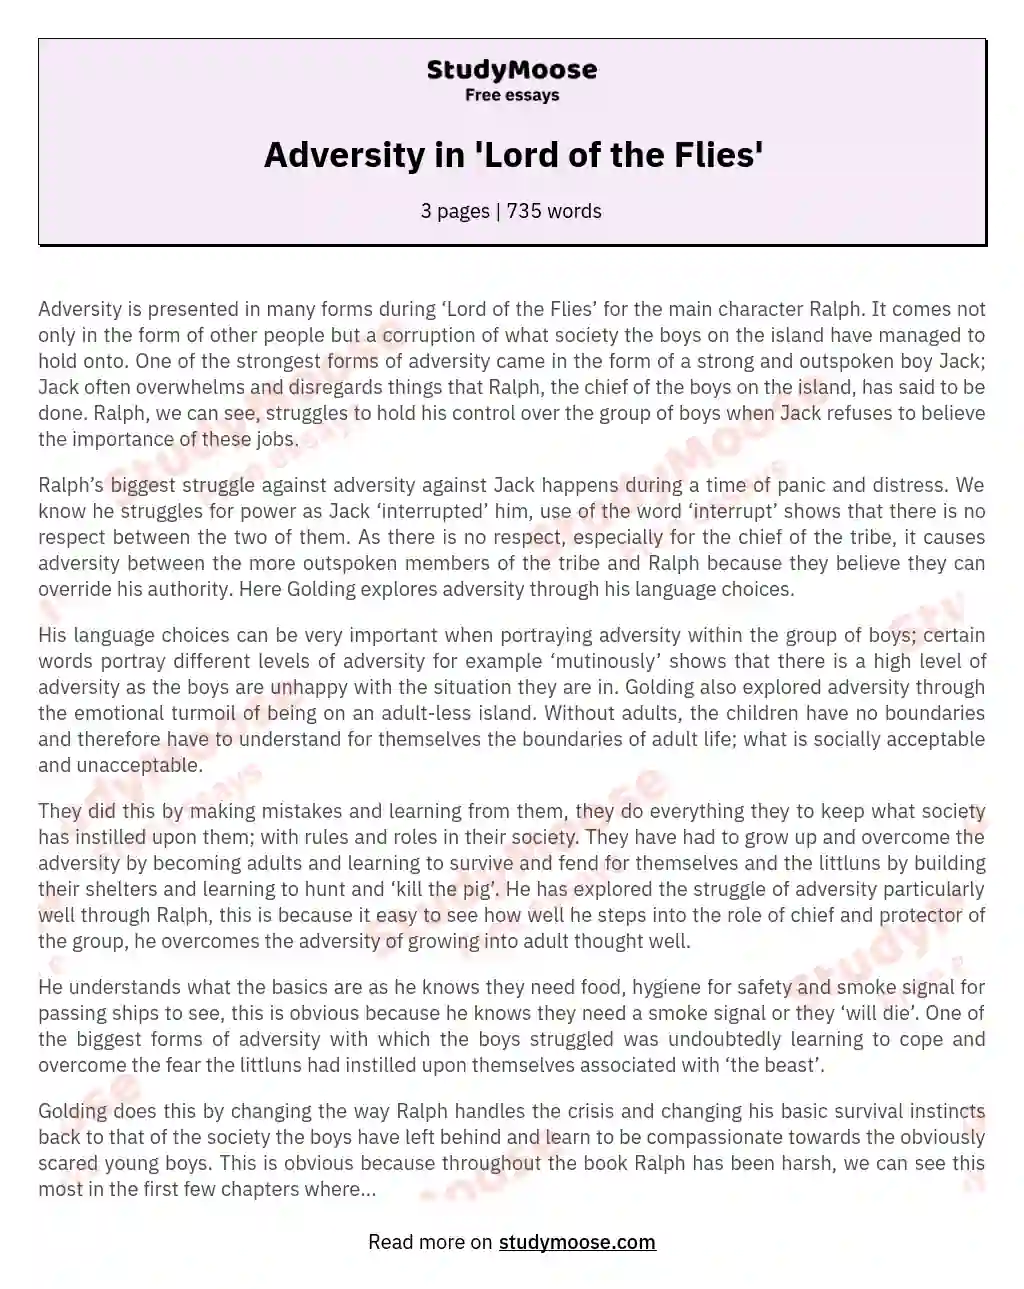 Adversity in 'Lord of the Flies'